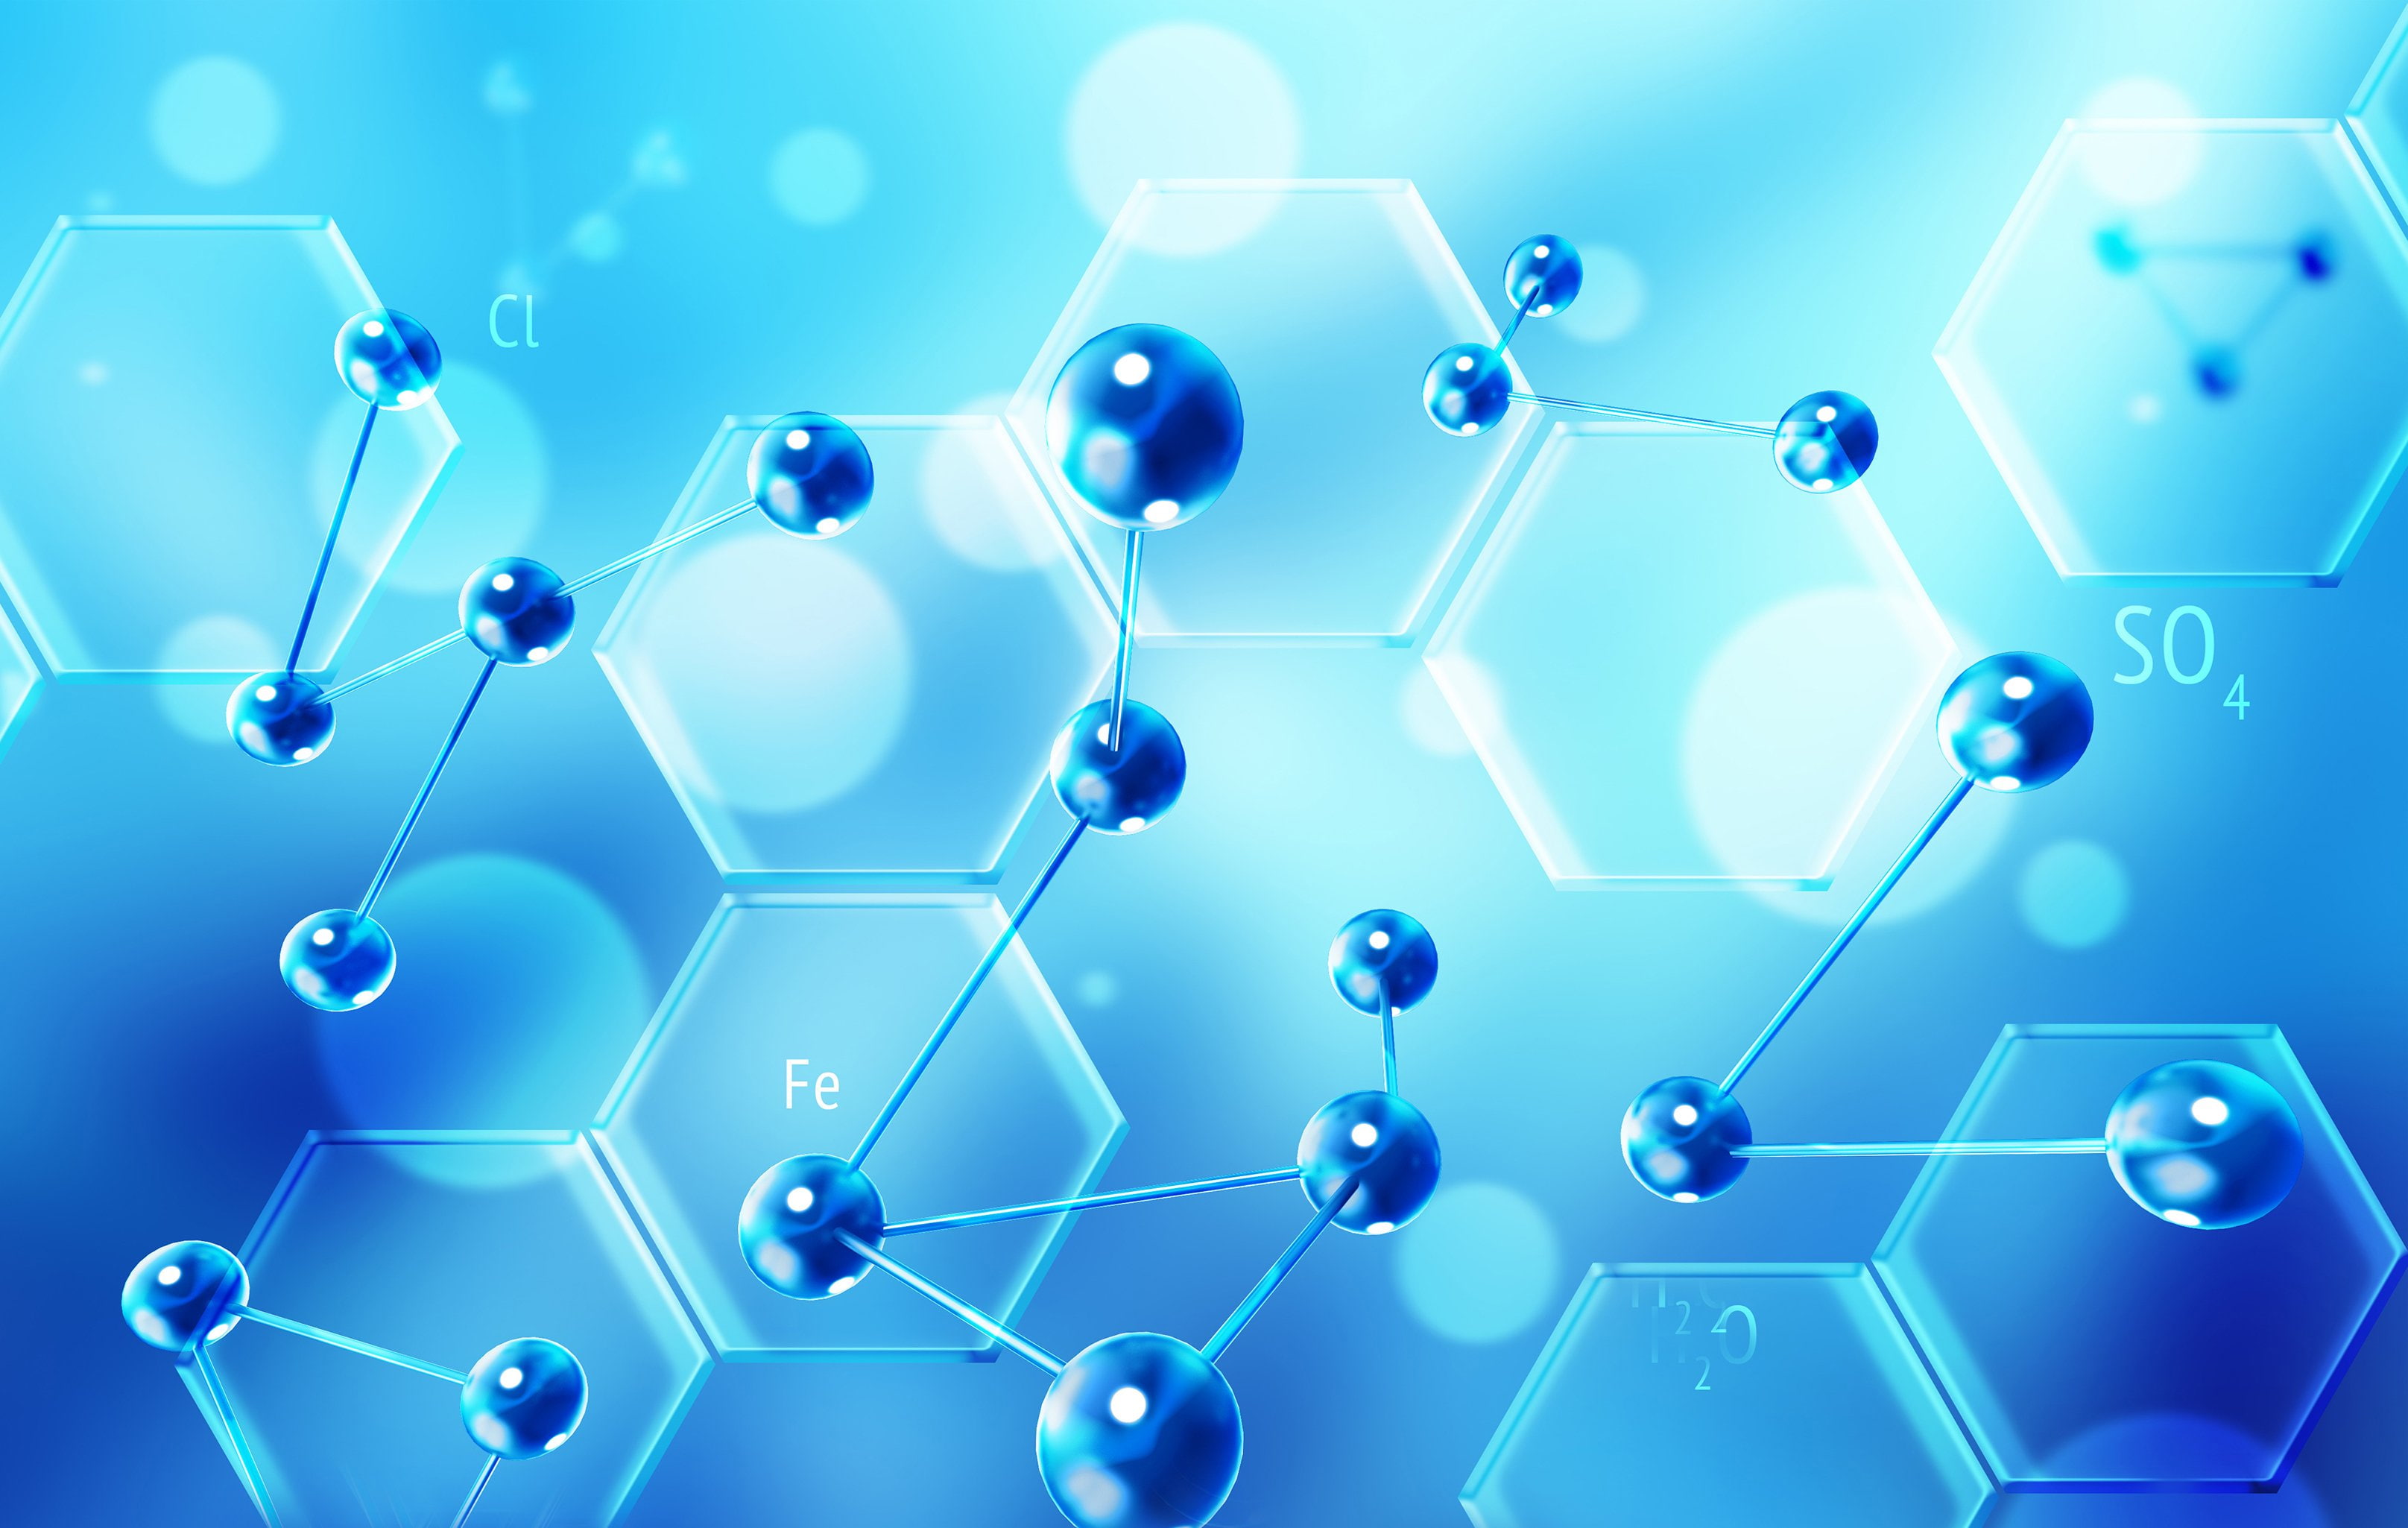 Background Images Of Chemistry - 3231x2050 Wallpaper 